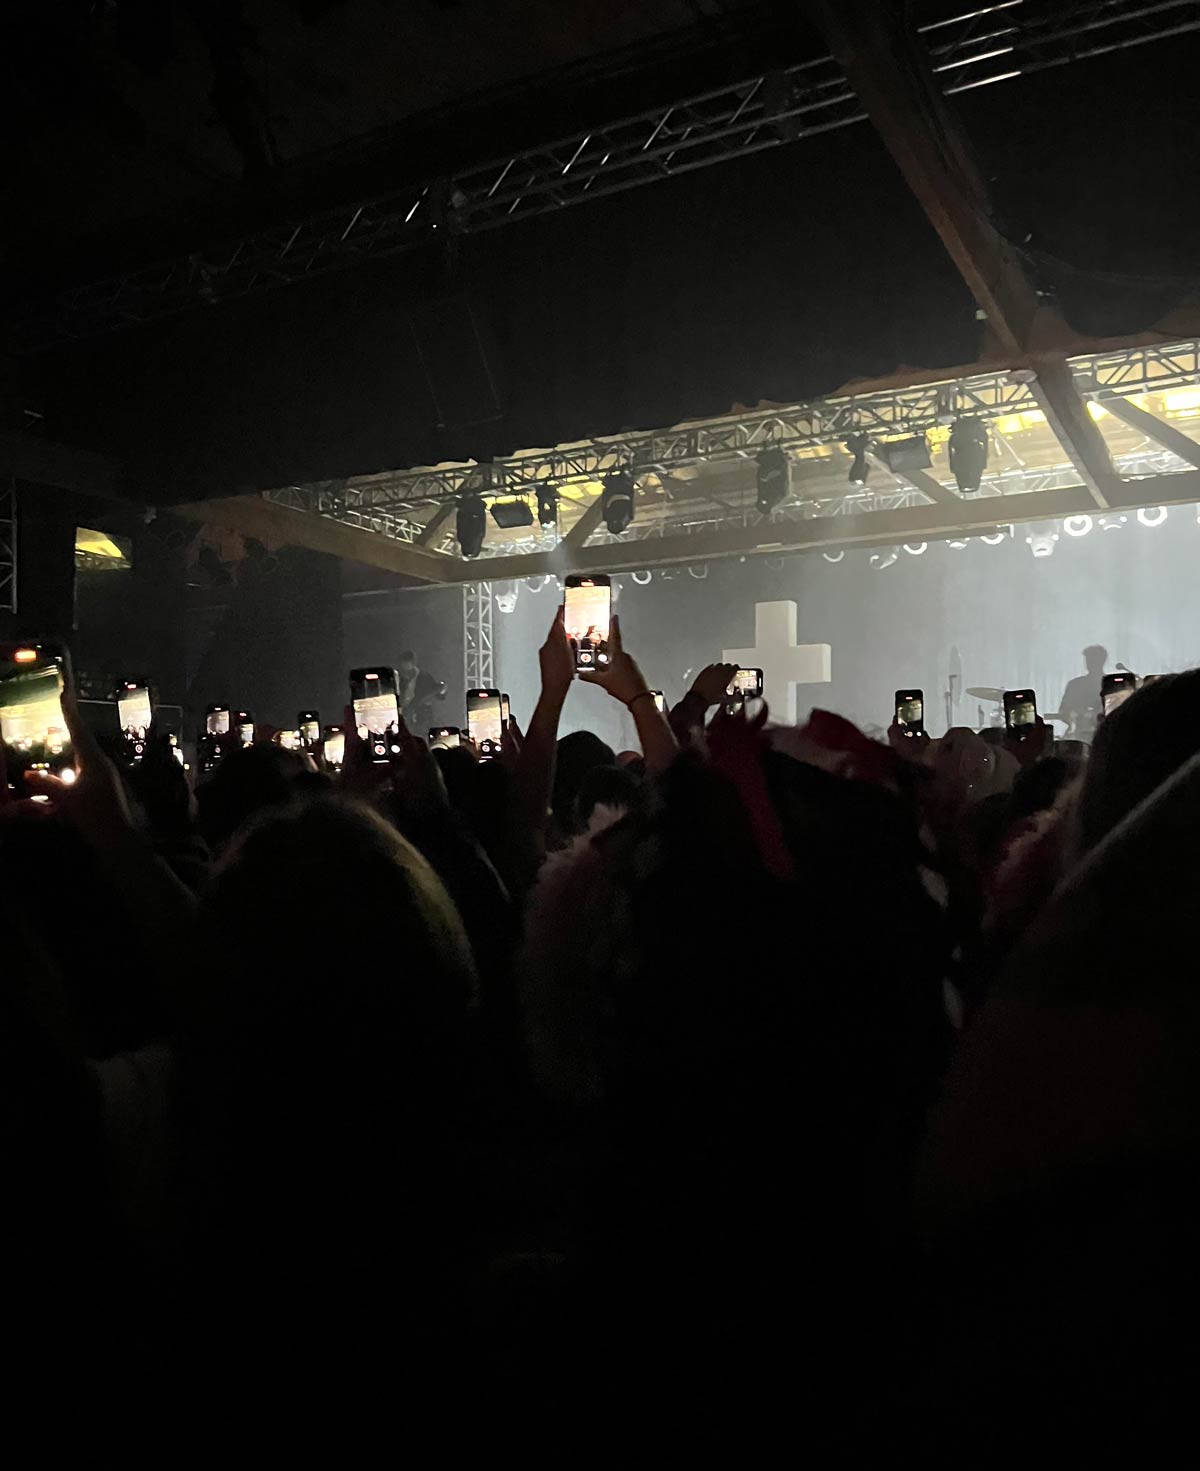 Traveled to another country for a concert just to watch it through other peoples’ phones